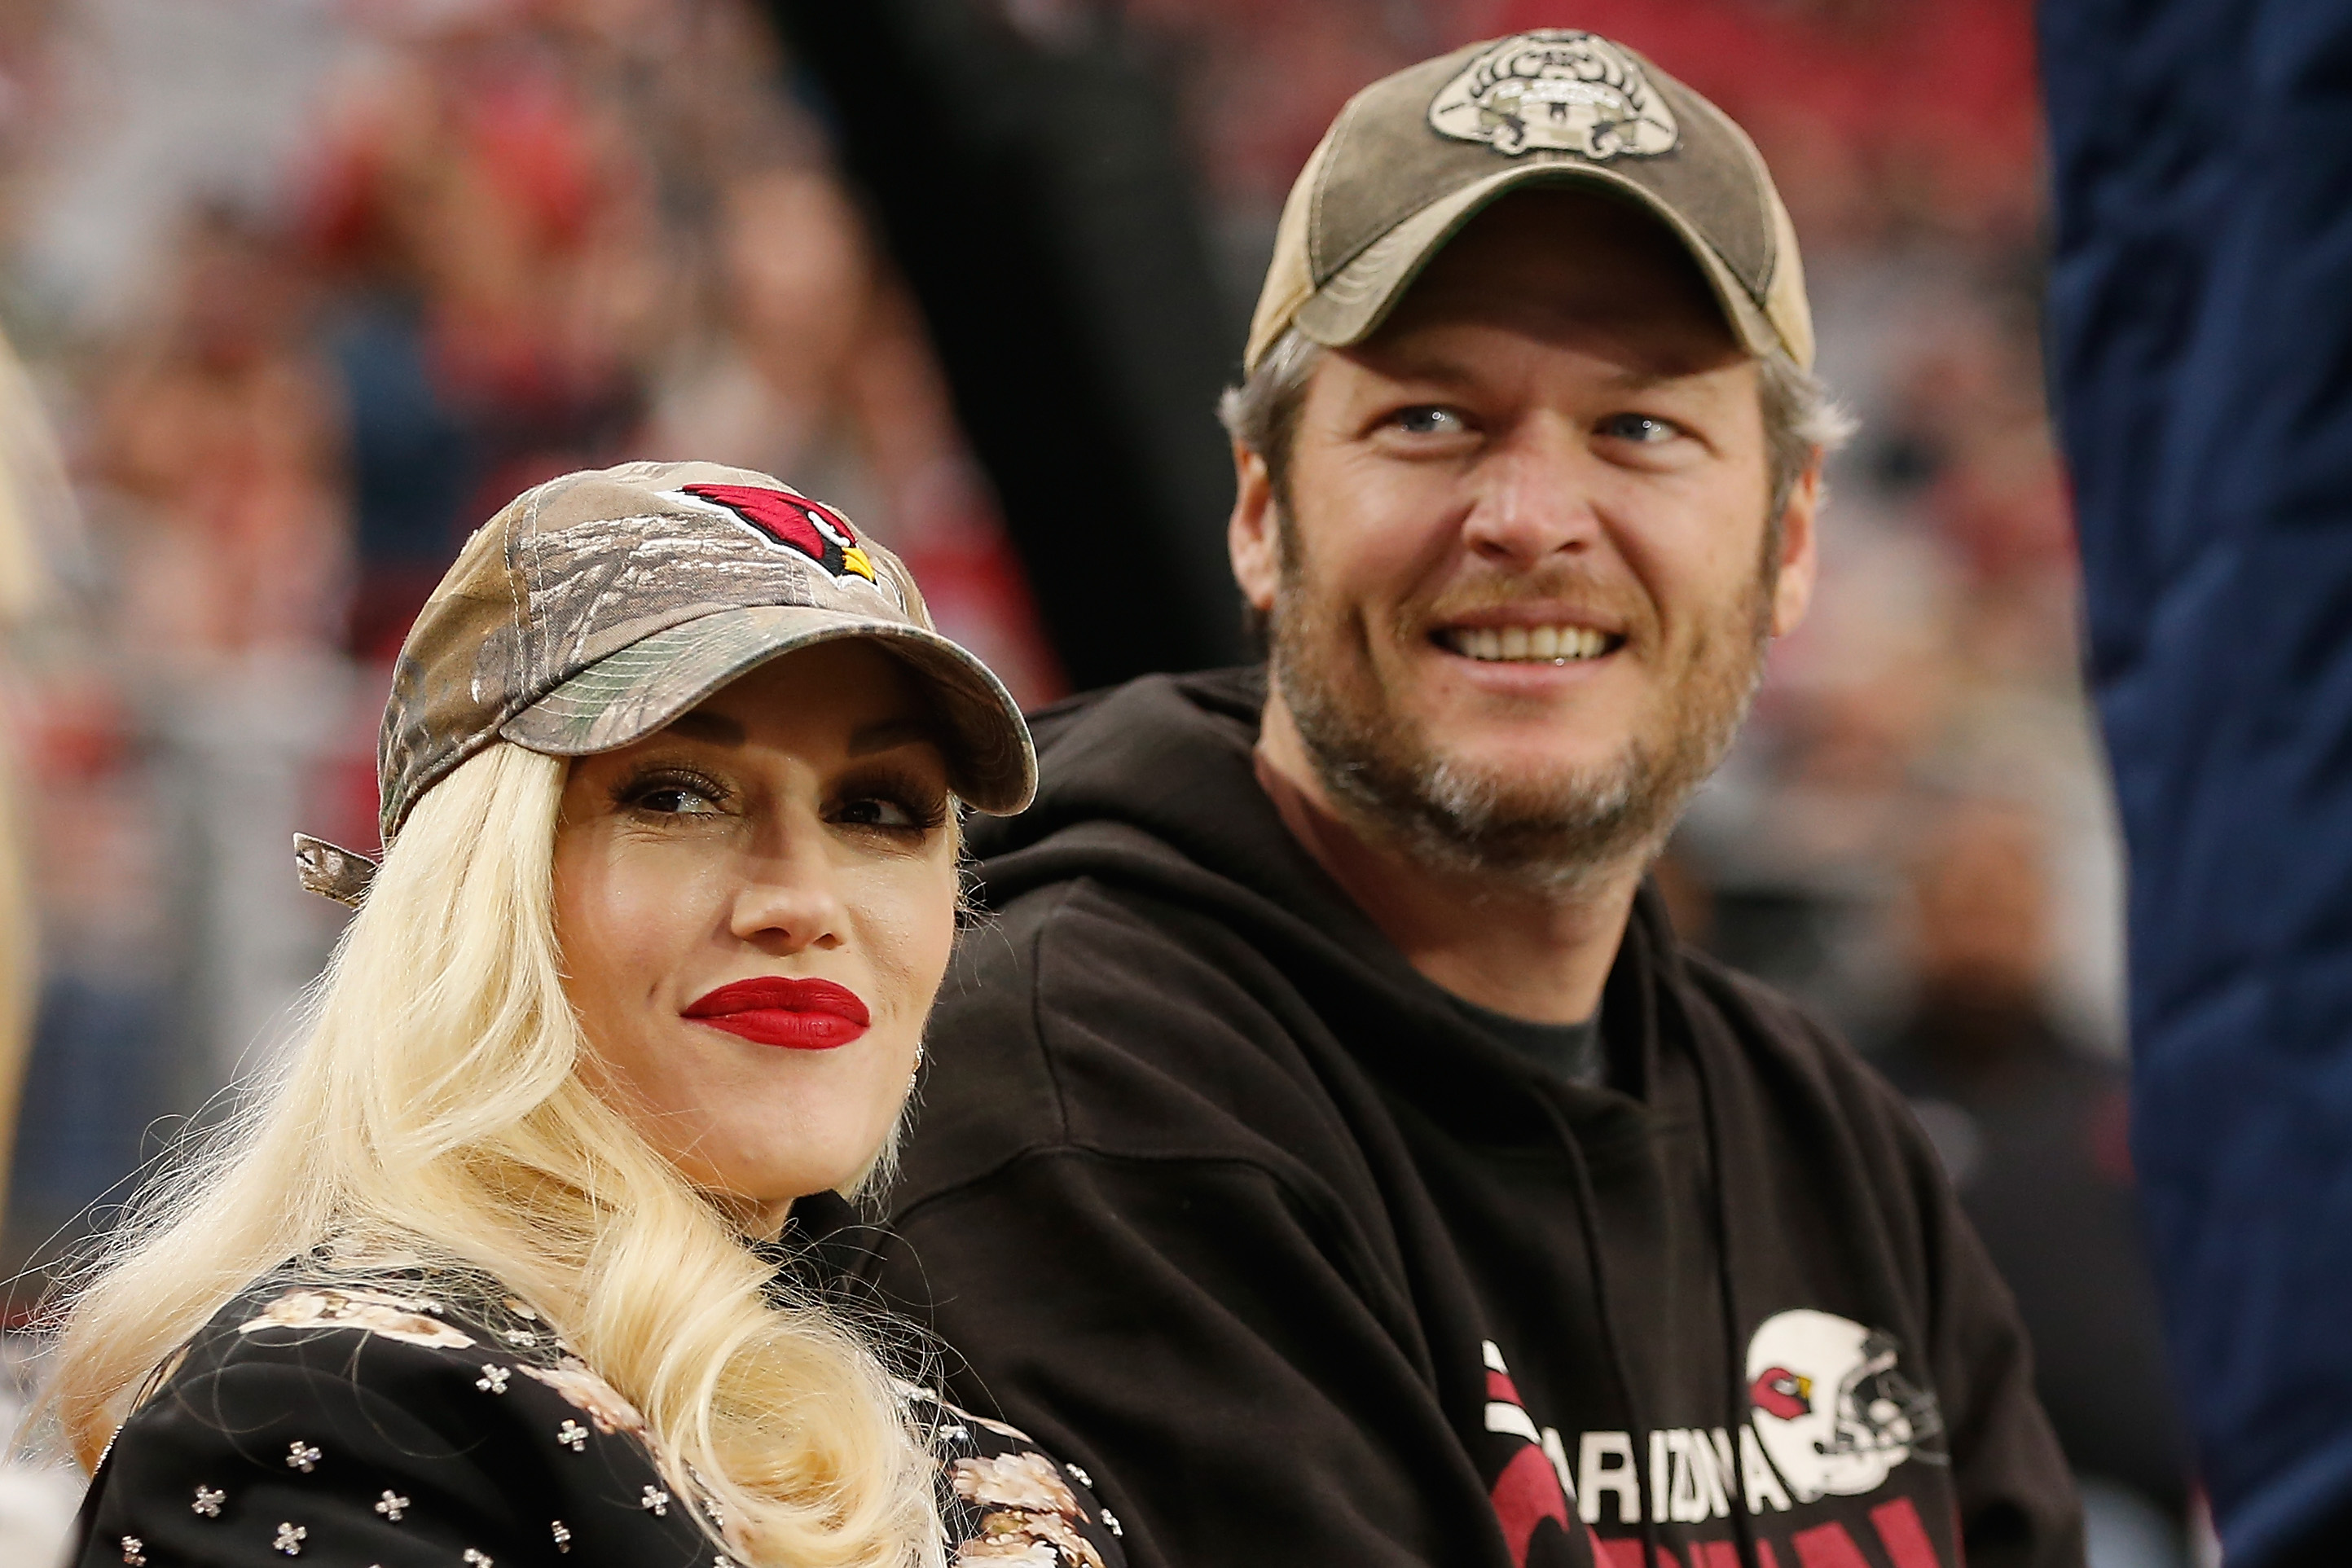 Gwen Stefani and Blake Shelton at an NFL game on December 27, 2015, in Glendale, Arizona. | Source: Getty Images